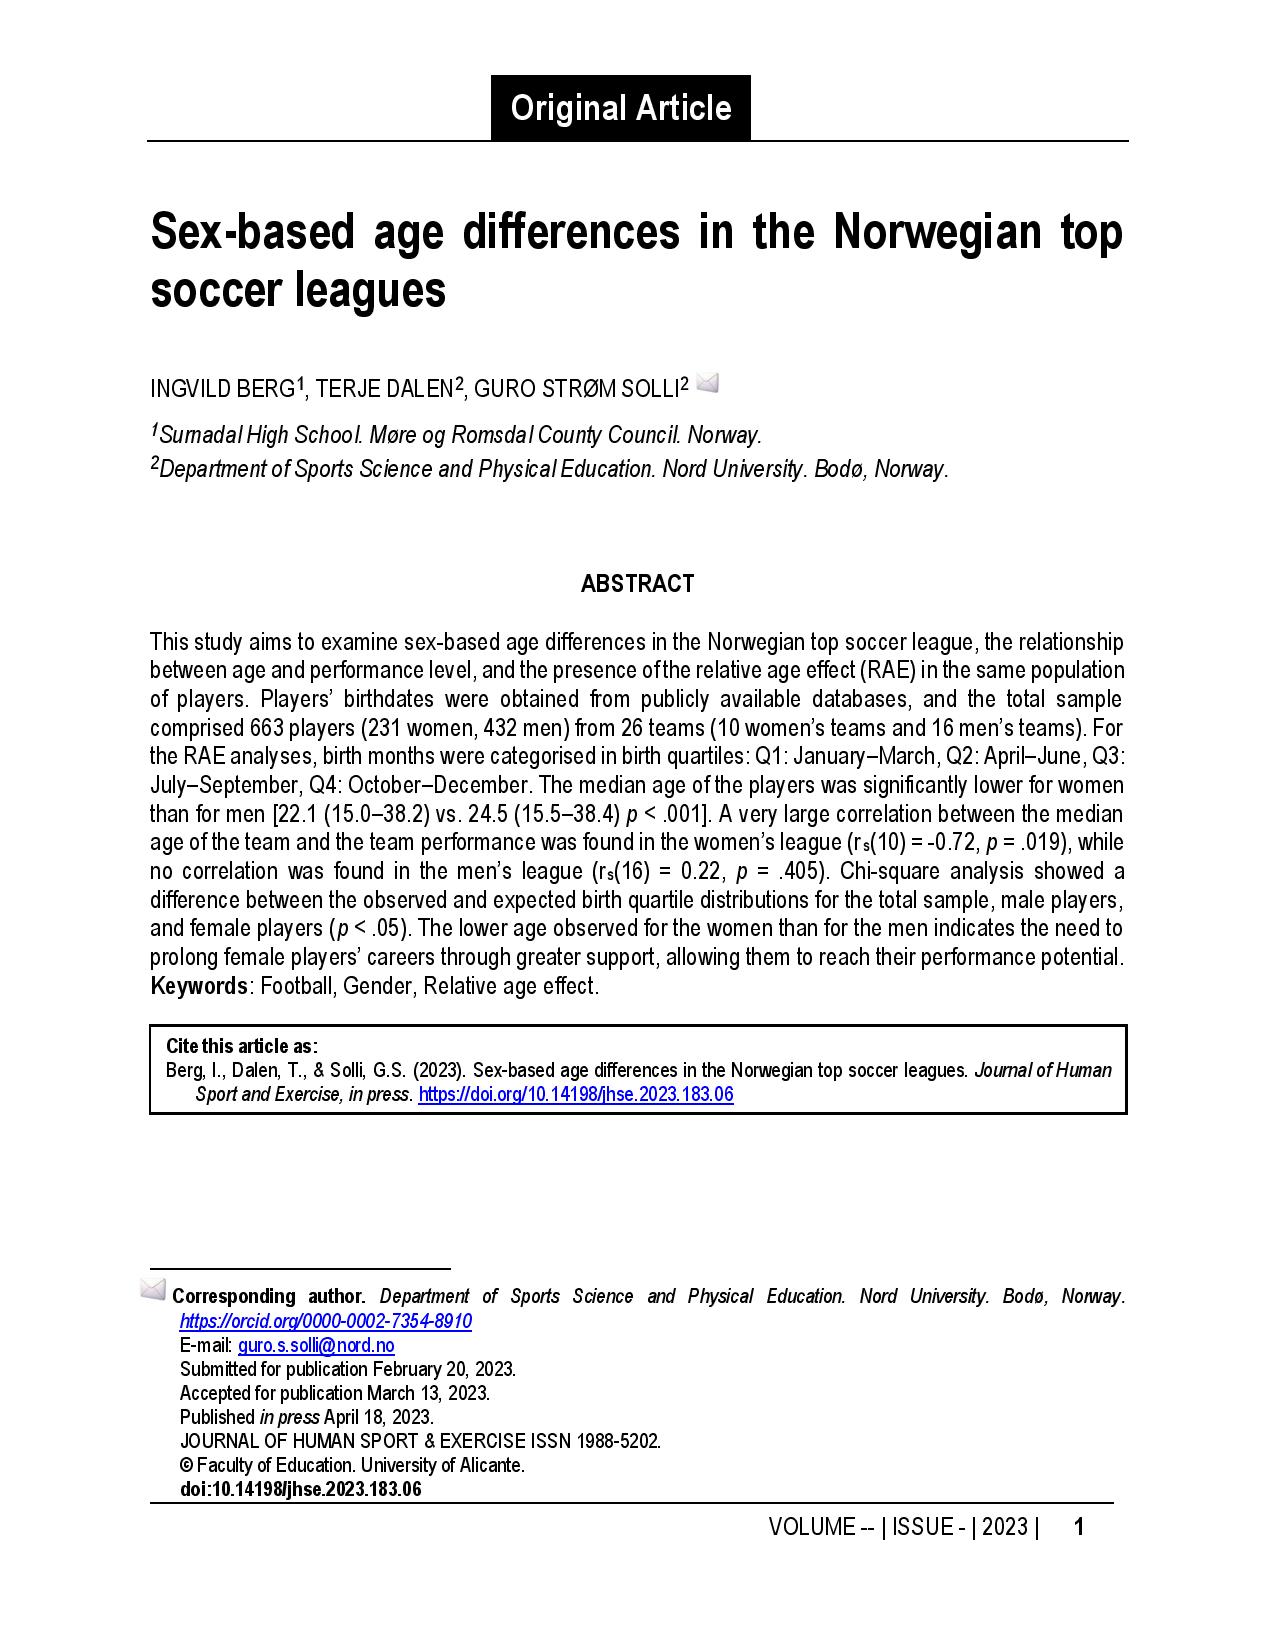 Sex-based age differences in the Norwegian top soccer leagues